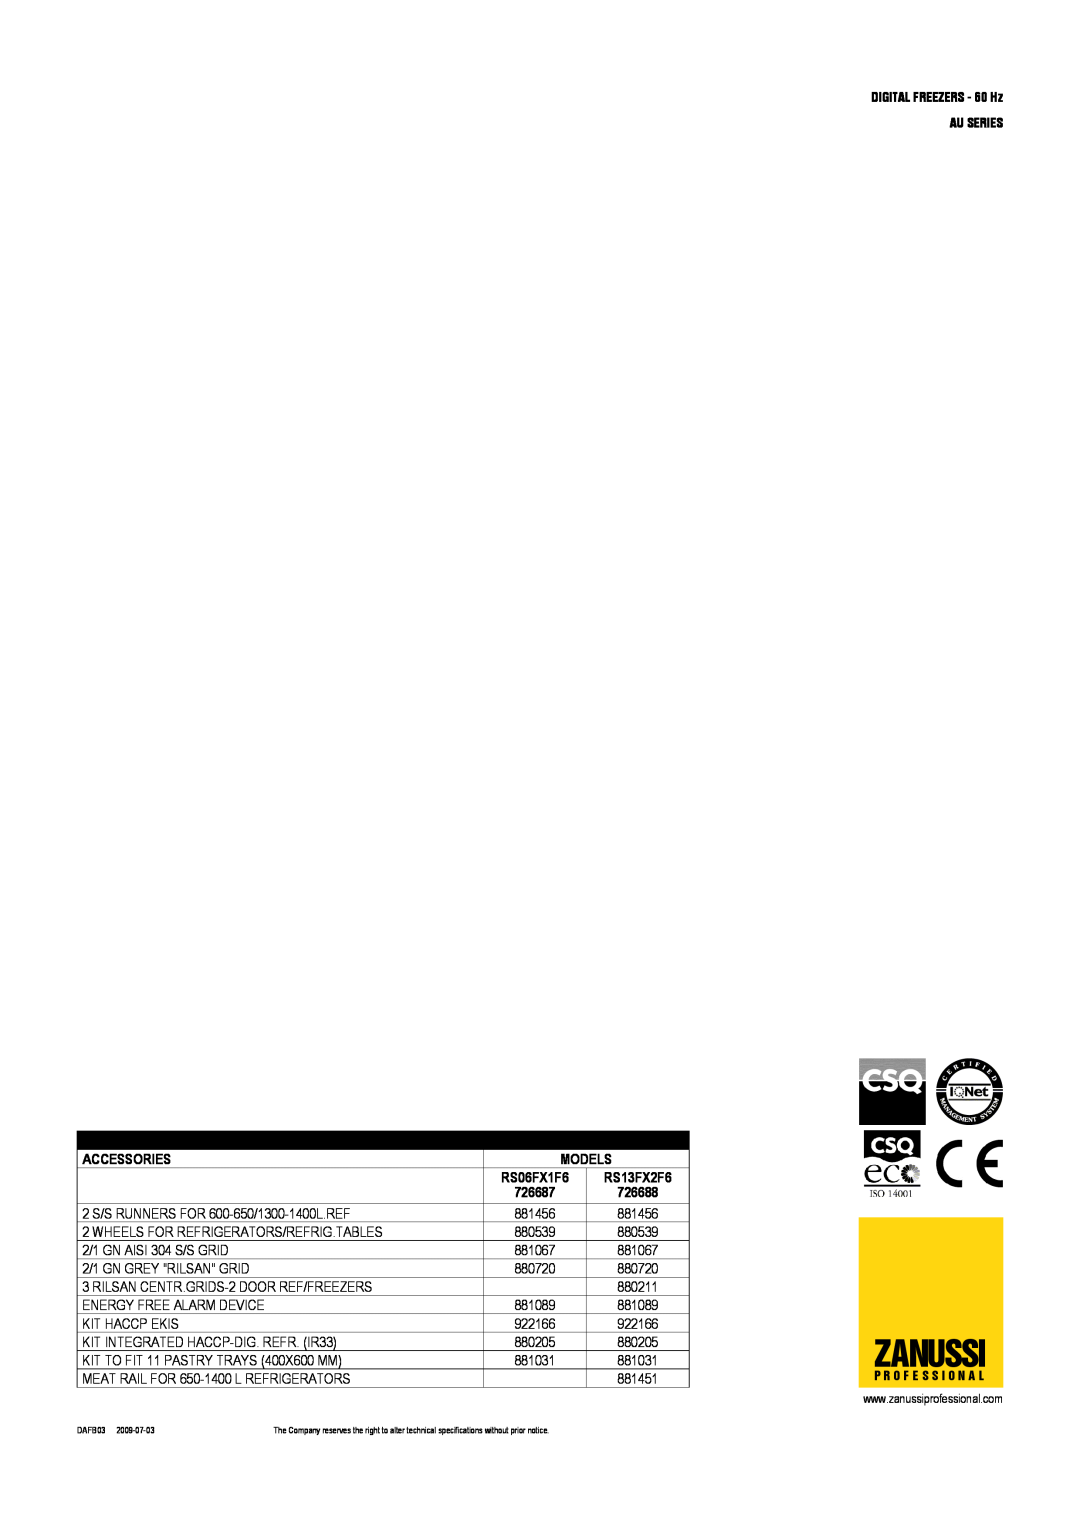 Electrolux RS13FX2F6, RS06FX1F6 dimensions Zanussi, Optional Accessories, Models, 726687, 726688 